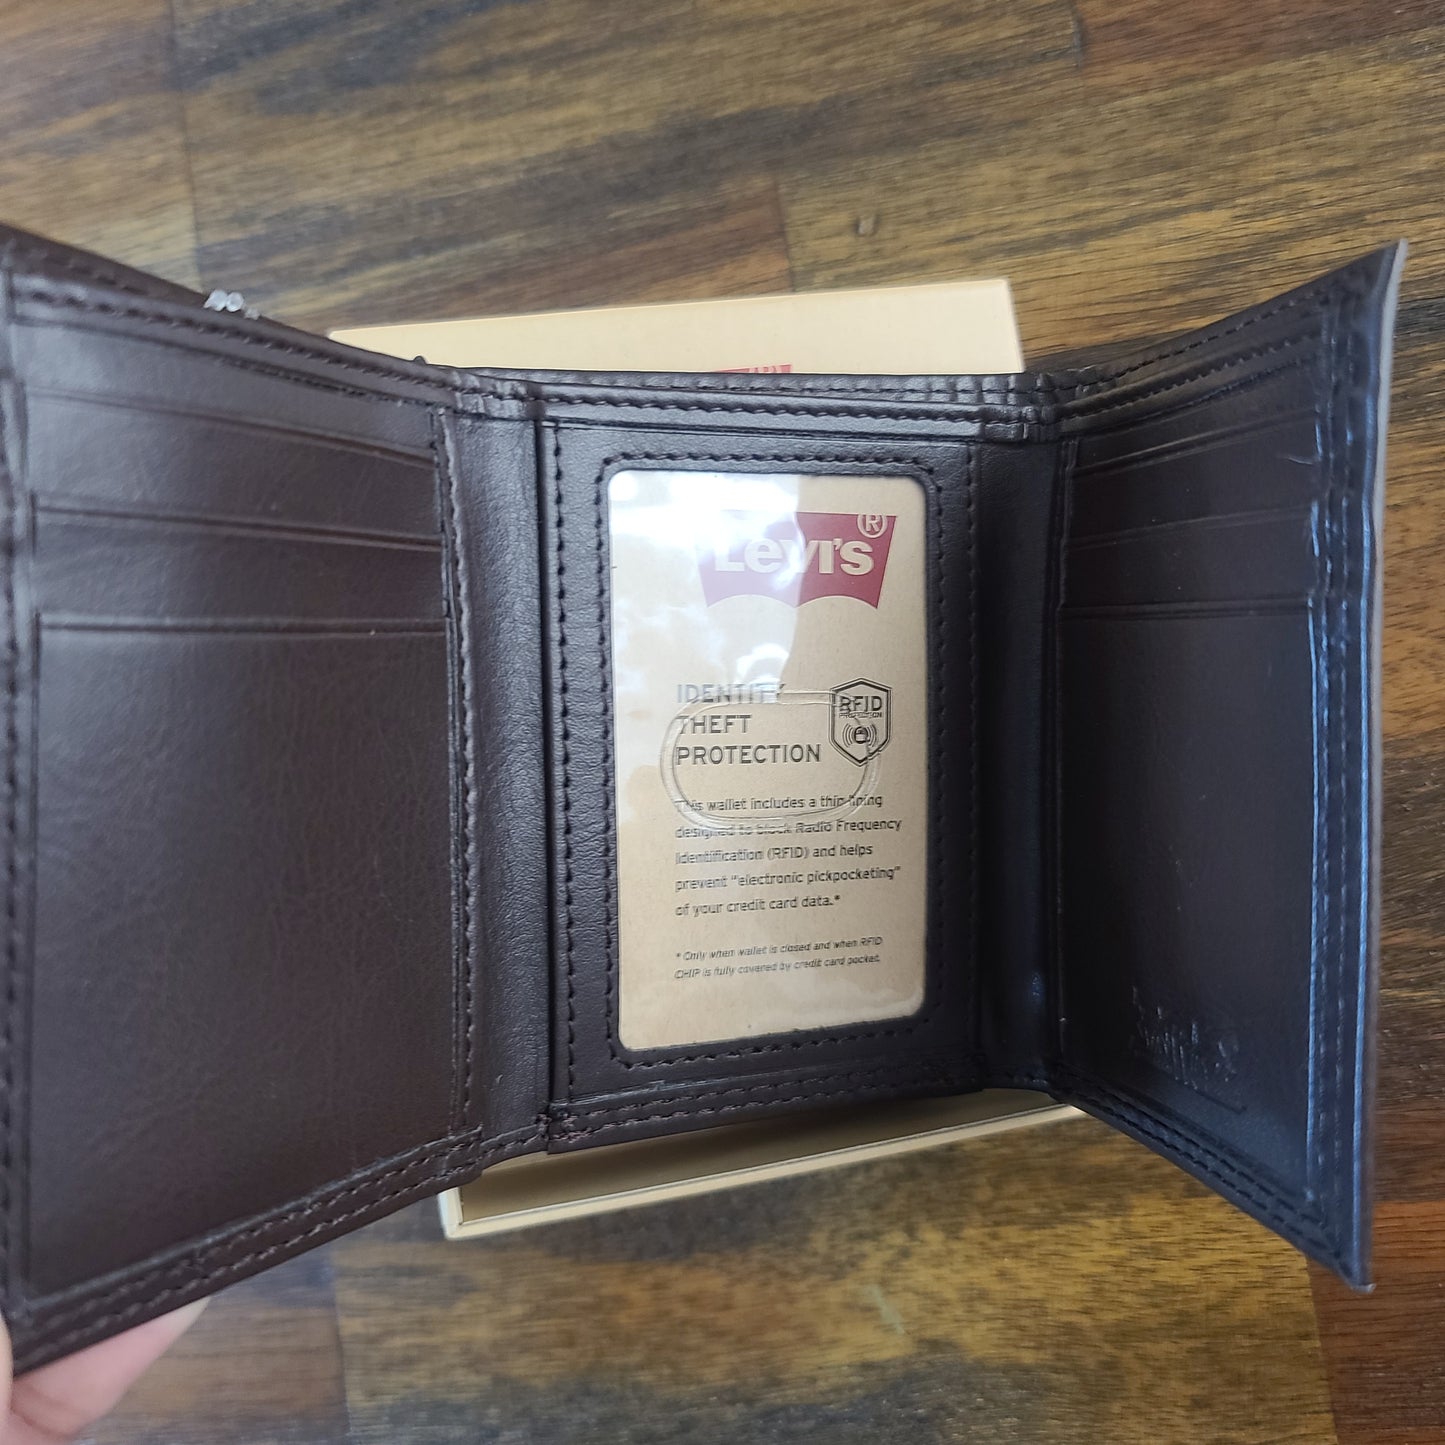 Levi Trifold Wallet (RFID)